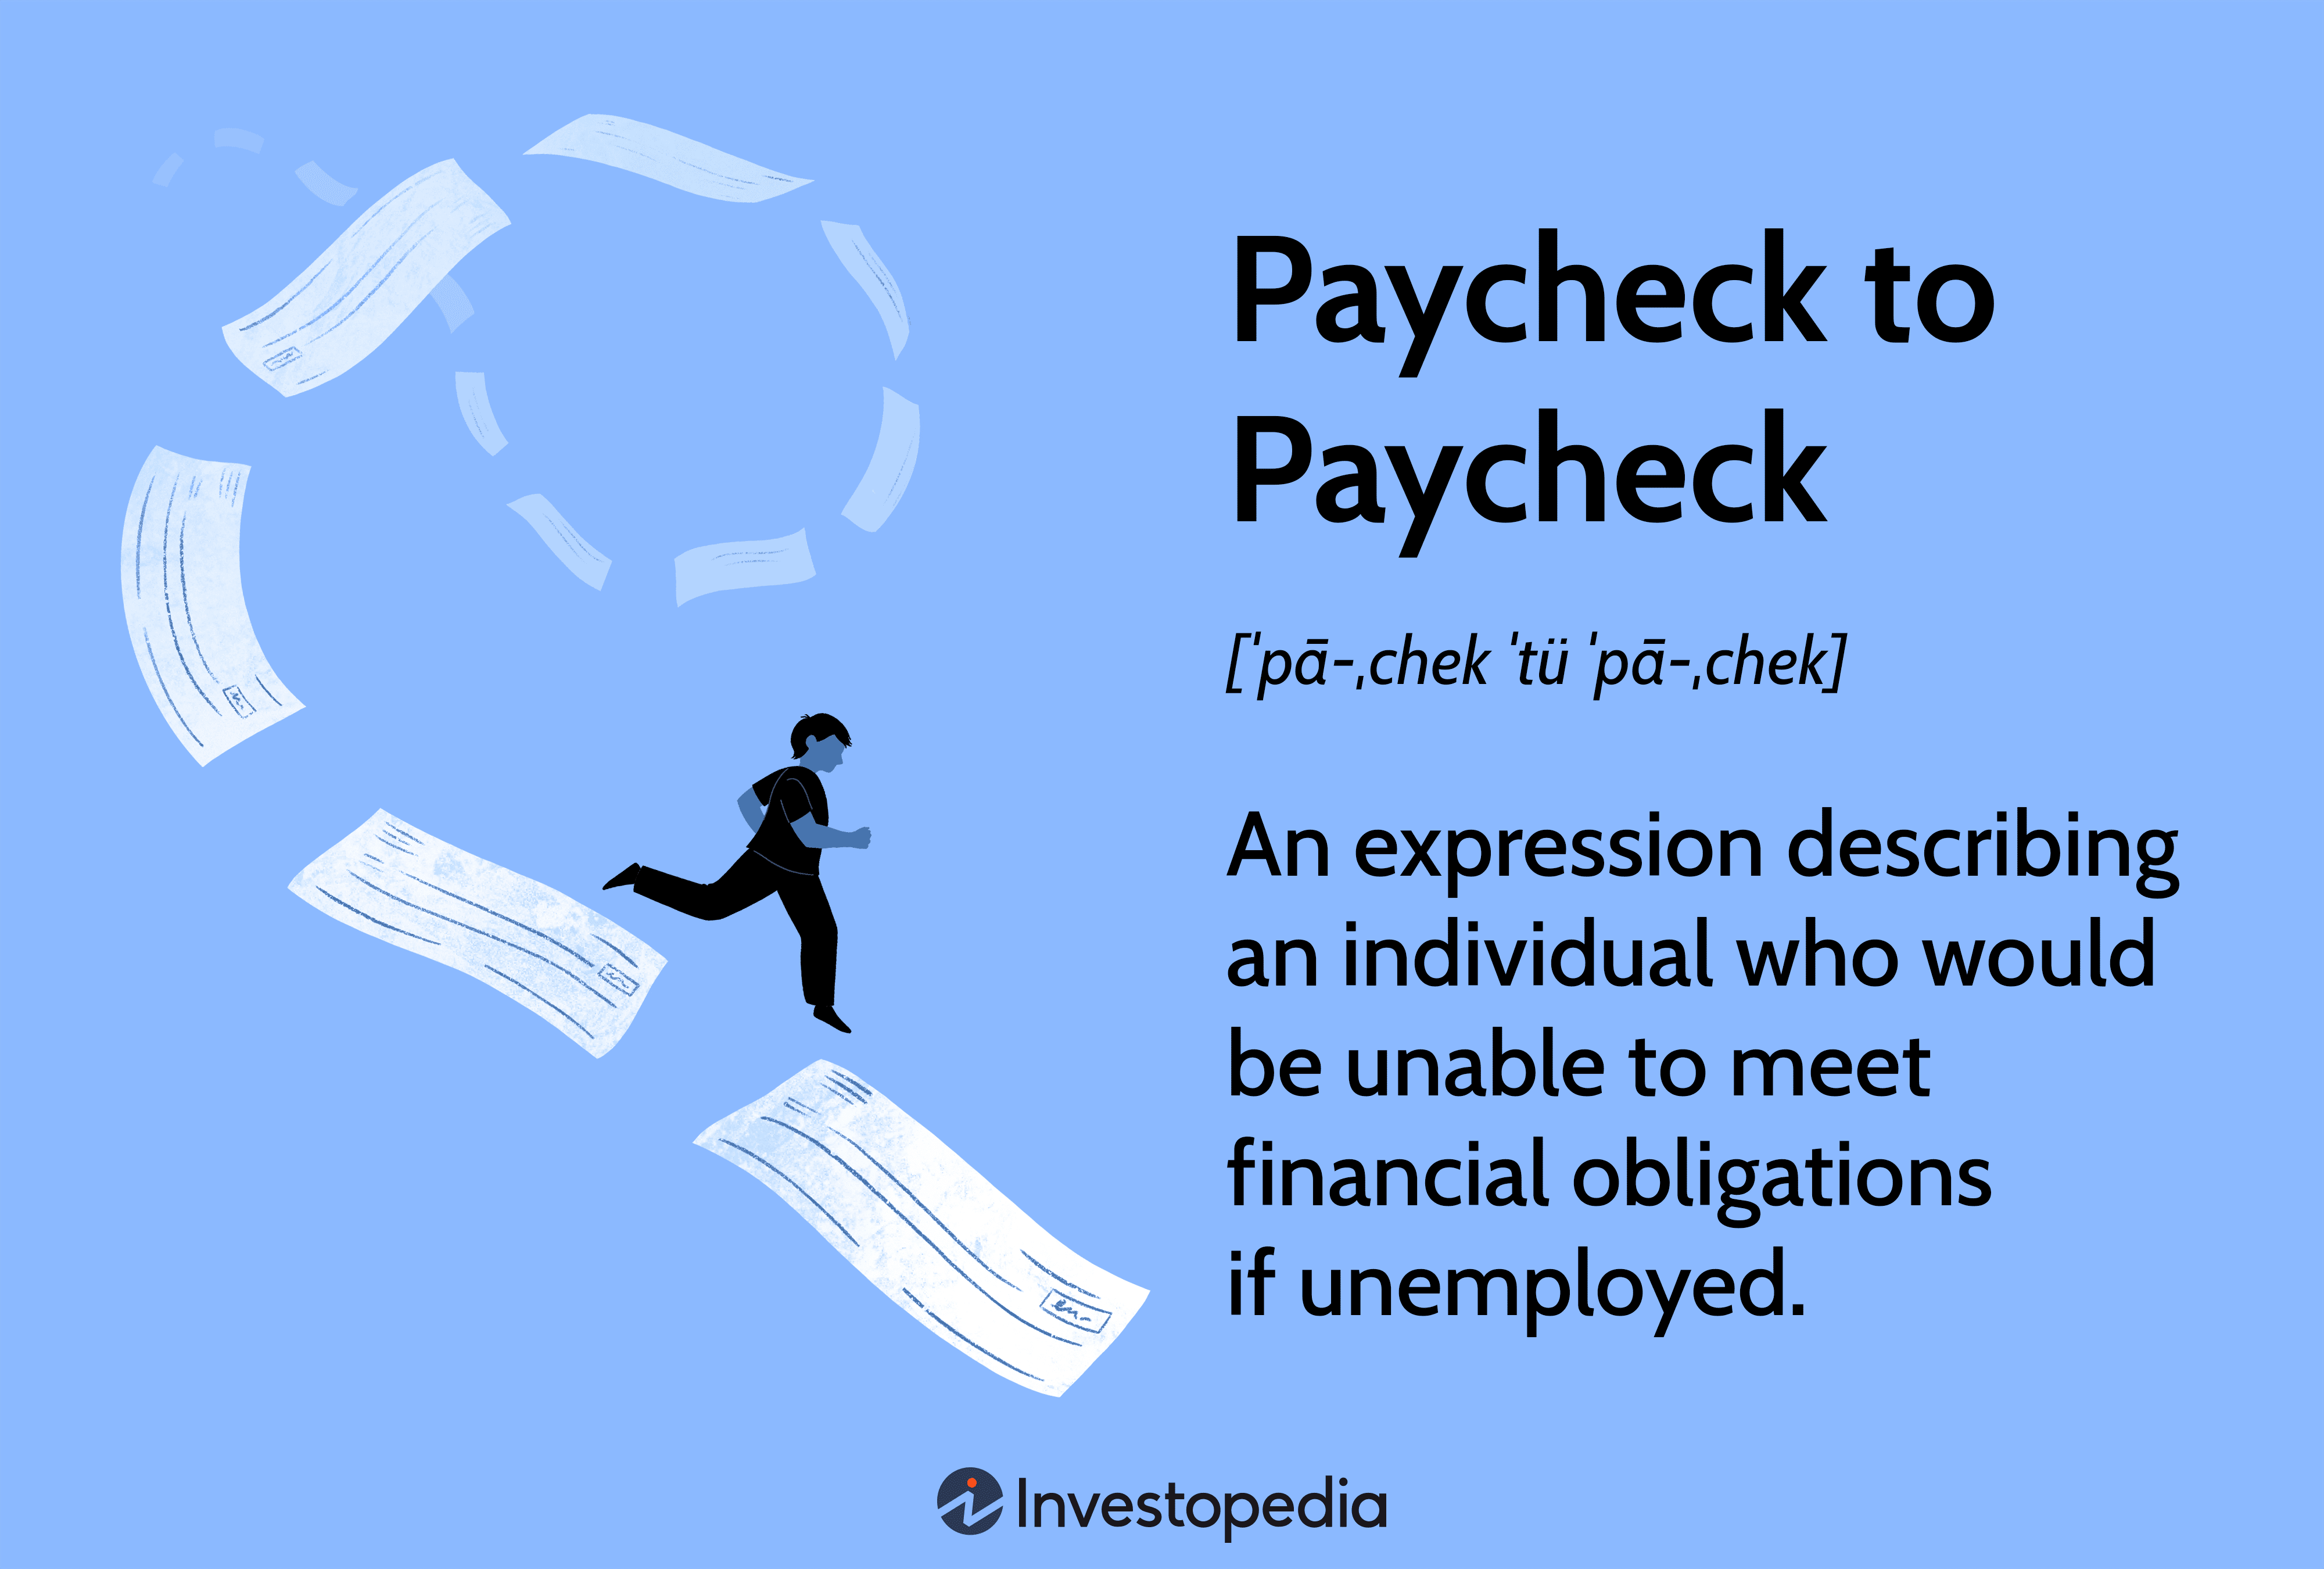 Paycheck to Paycheck: An expression describing an individual who would be unable to meet financial obligations if unemployed.